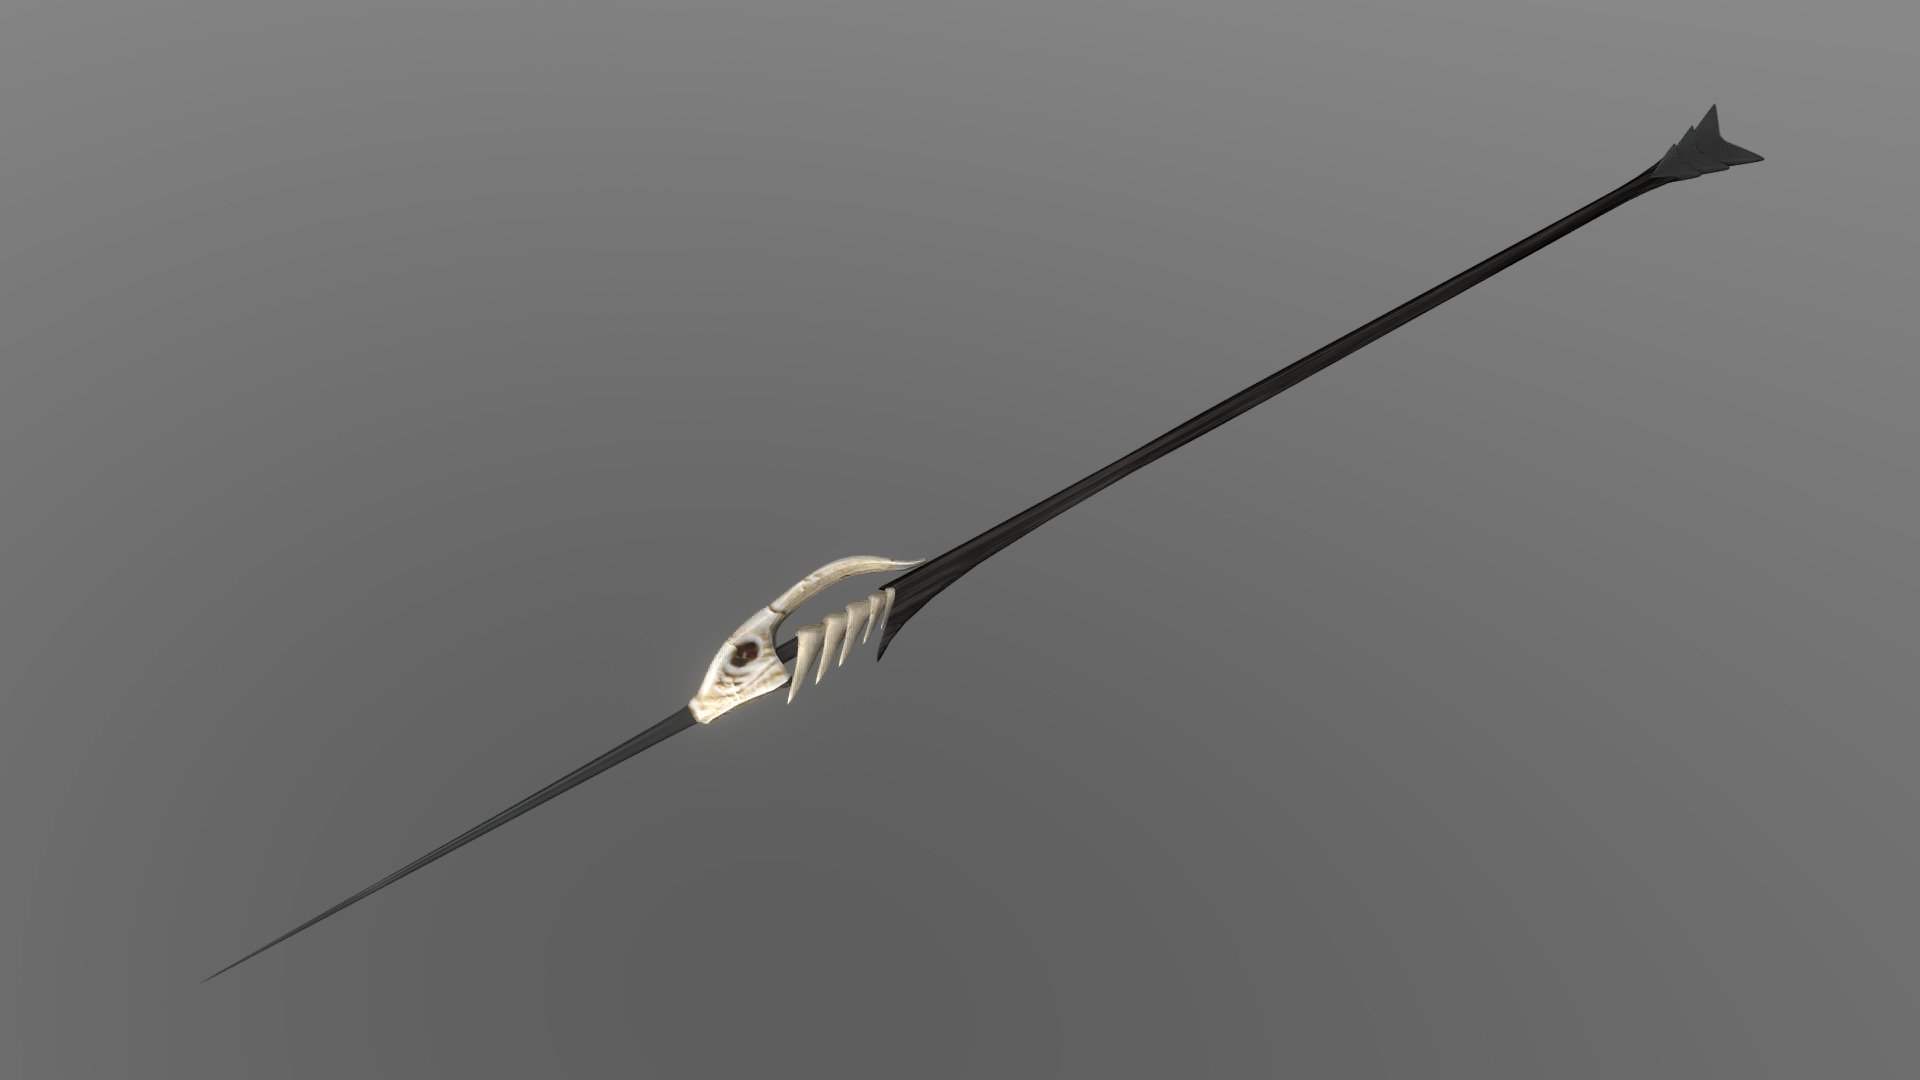 Fishbone Spear
Bring your project to life with this low poly 3D model of an Fishbone Spear. Perfect for use in games, animations, VR, AR, and more, this model is optimized for performance and still retains a high level of detail.


Features



Low poly design with 5,658 vertices

11,184 edges

5,544 faces (polygons)

11,088 tris

2k PBR Textures and materials

File formats included: .obj, .fbx, .dae, .stl


Tools Used
This Fishbone Spear low poly 3D model was created using Blender 3.3.1, a popular and versatile 3D creation software.


Availability
This low poly Fishbone Spear 3D model is ready for use and available for purchase. Bring your project to the next level with this high-quality and optimized model 3d model